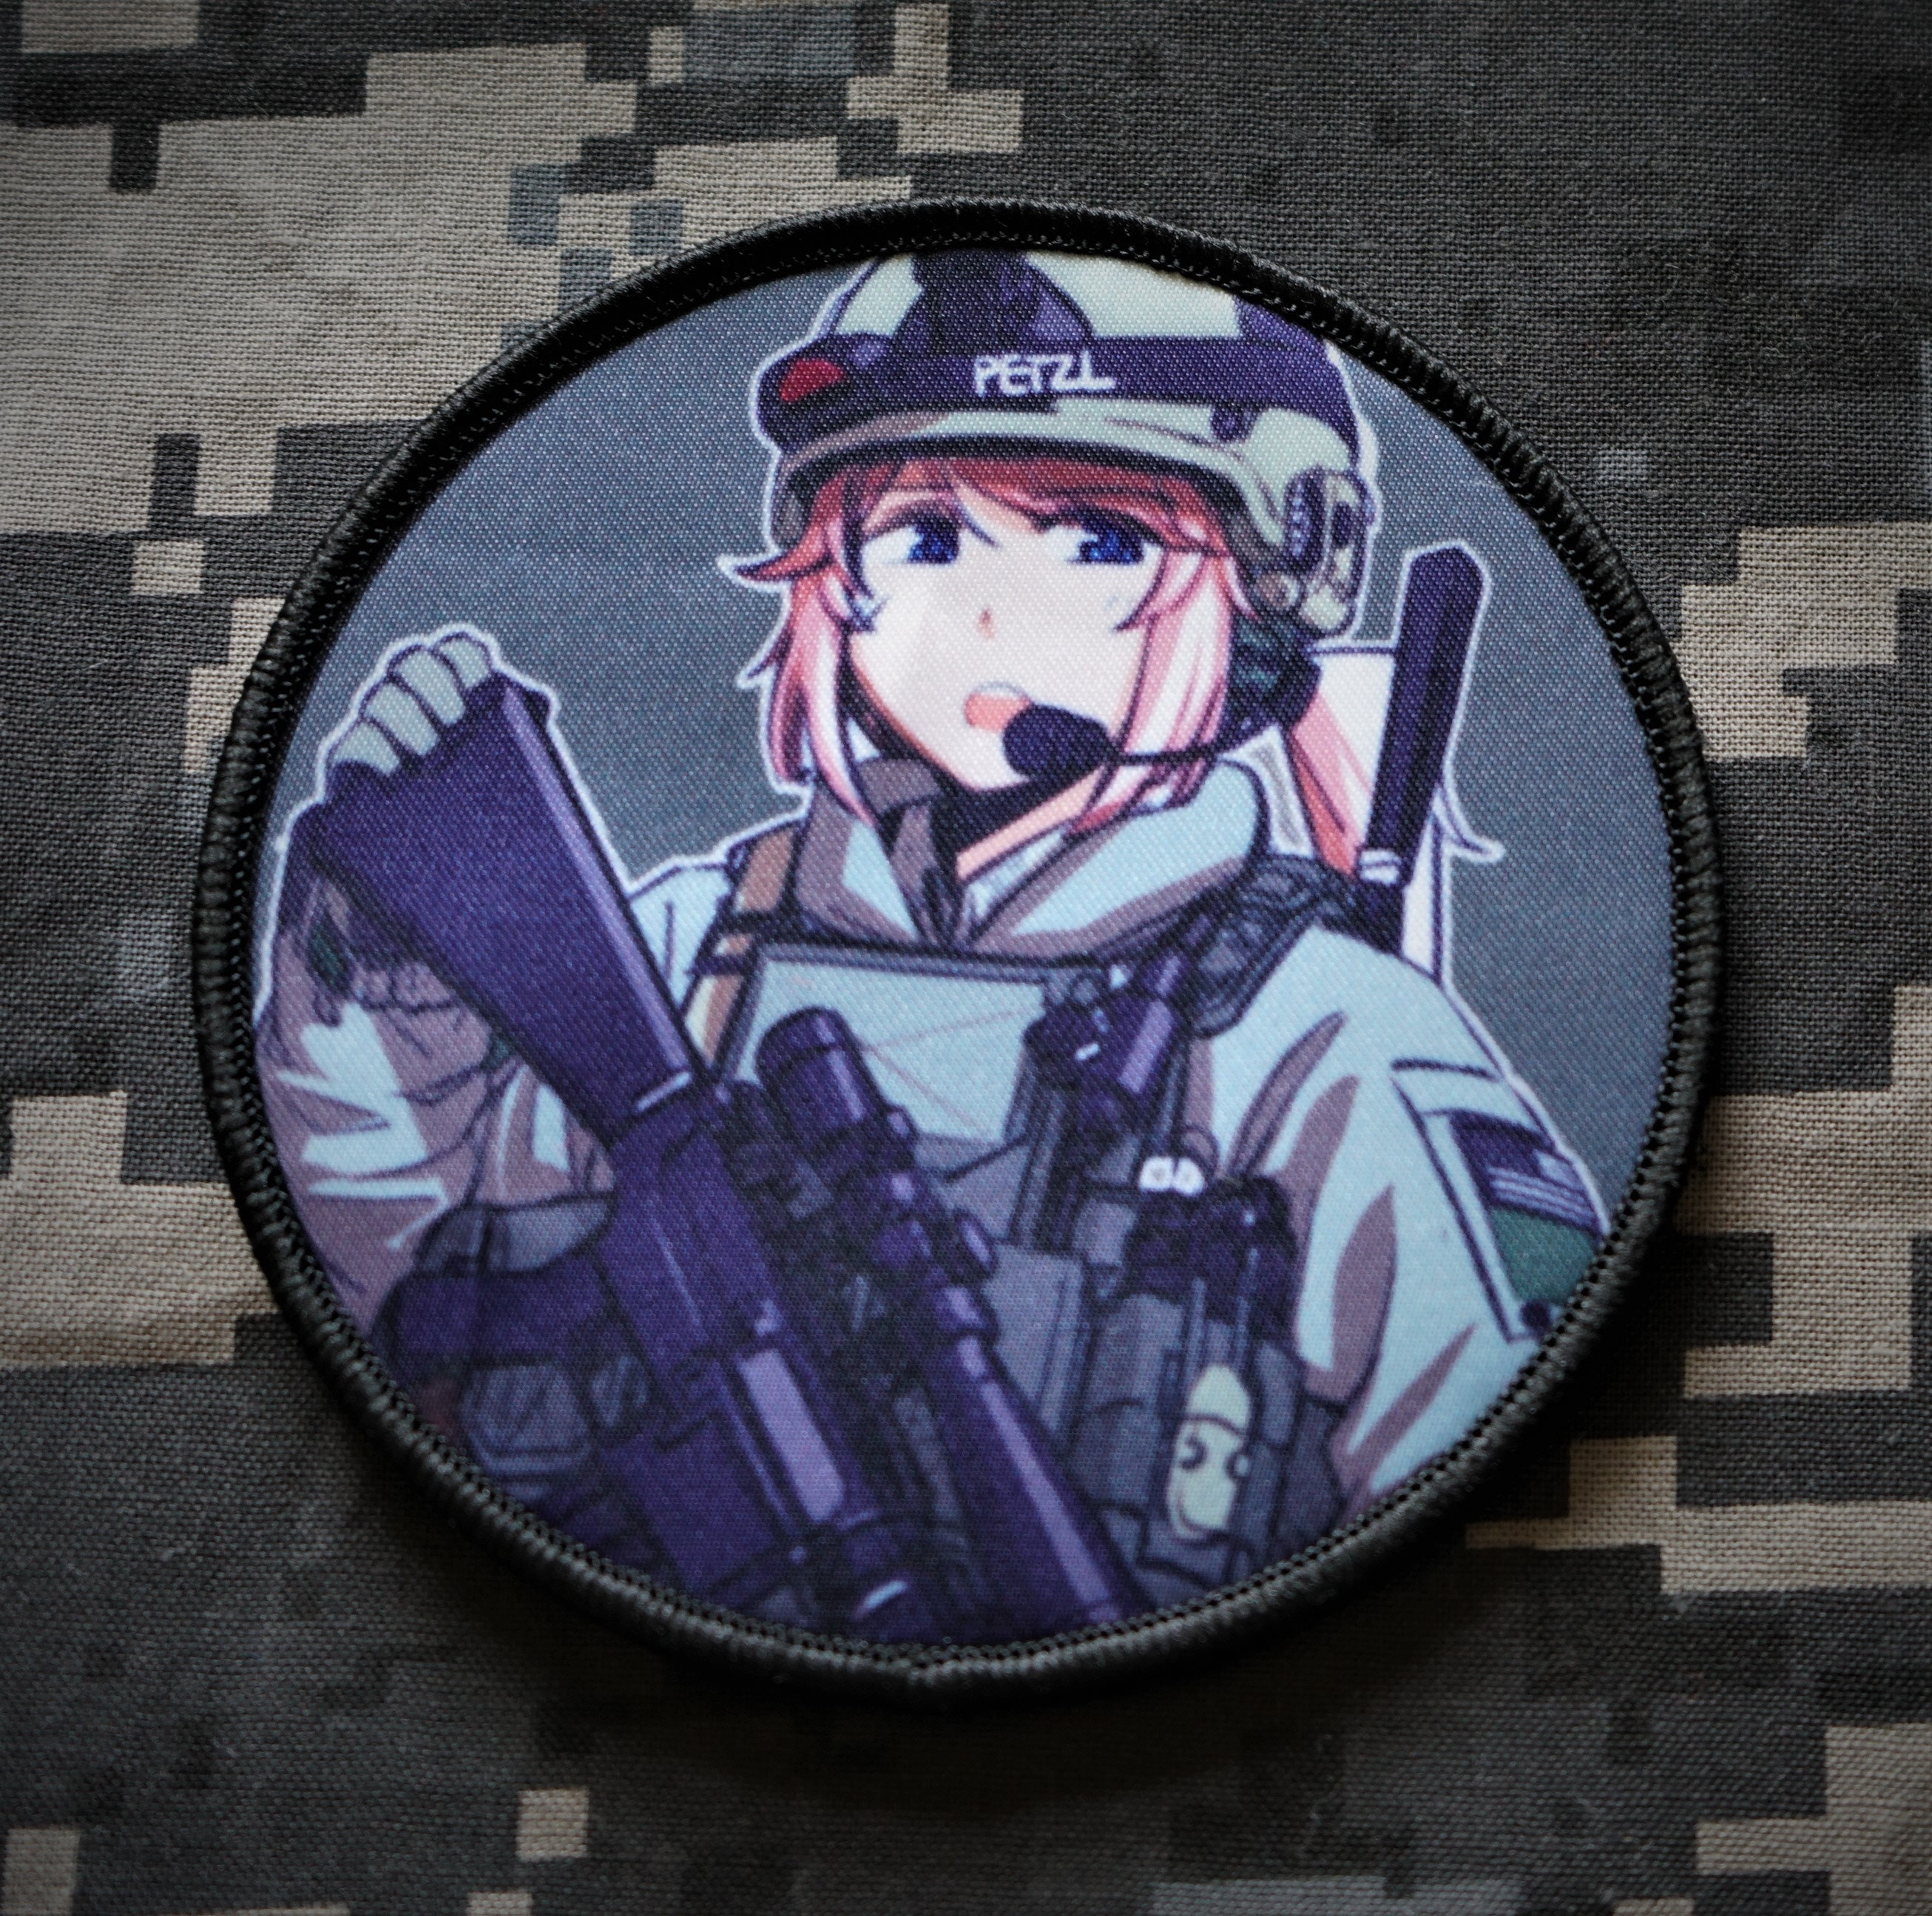 100 Pvc Patch, With Hook and Loop, Morale Patchn Pvc, Pvc Patches, Rubber  Patches, Pvc Morale Patch, Tactical Patch, Custom Pvc Patch, 